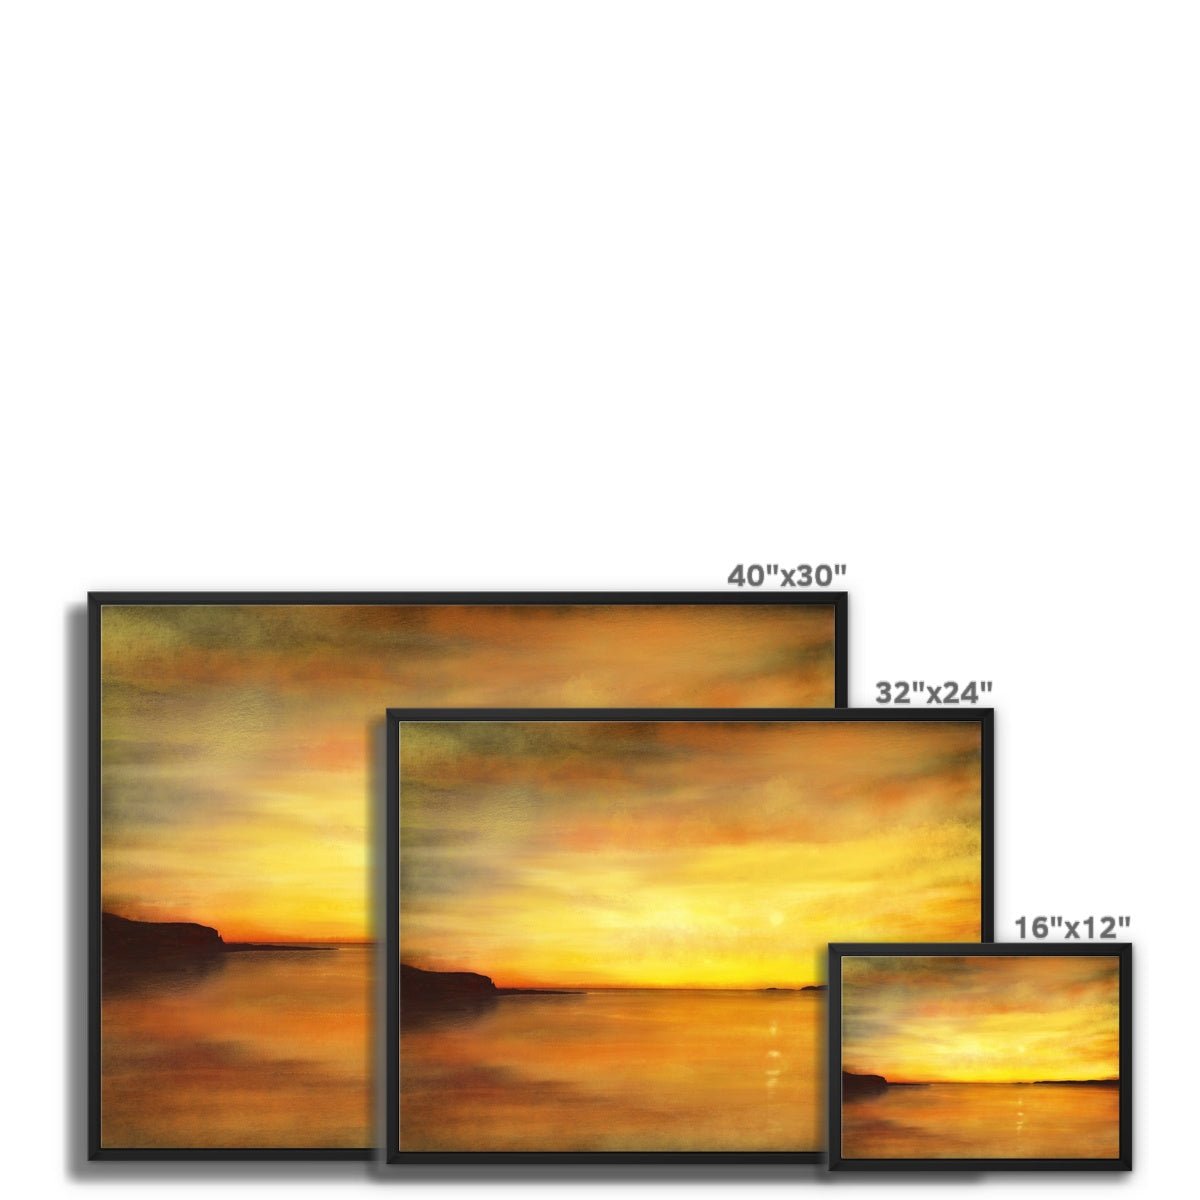 King's Cave Sunset Arran Painting | Framed Canvas From Scotland-Floating Framed Canvas Prints-Arran Art Gallery-Paintings, Prints, Homeware, Art Gifts From Scotland By Scottish Artist Kevin Hunter